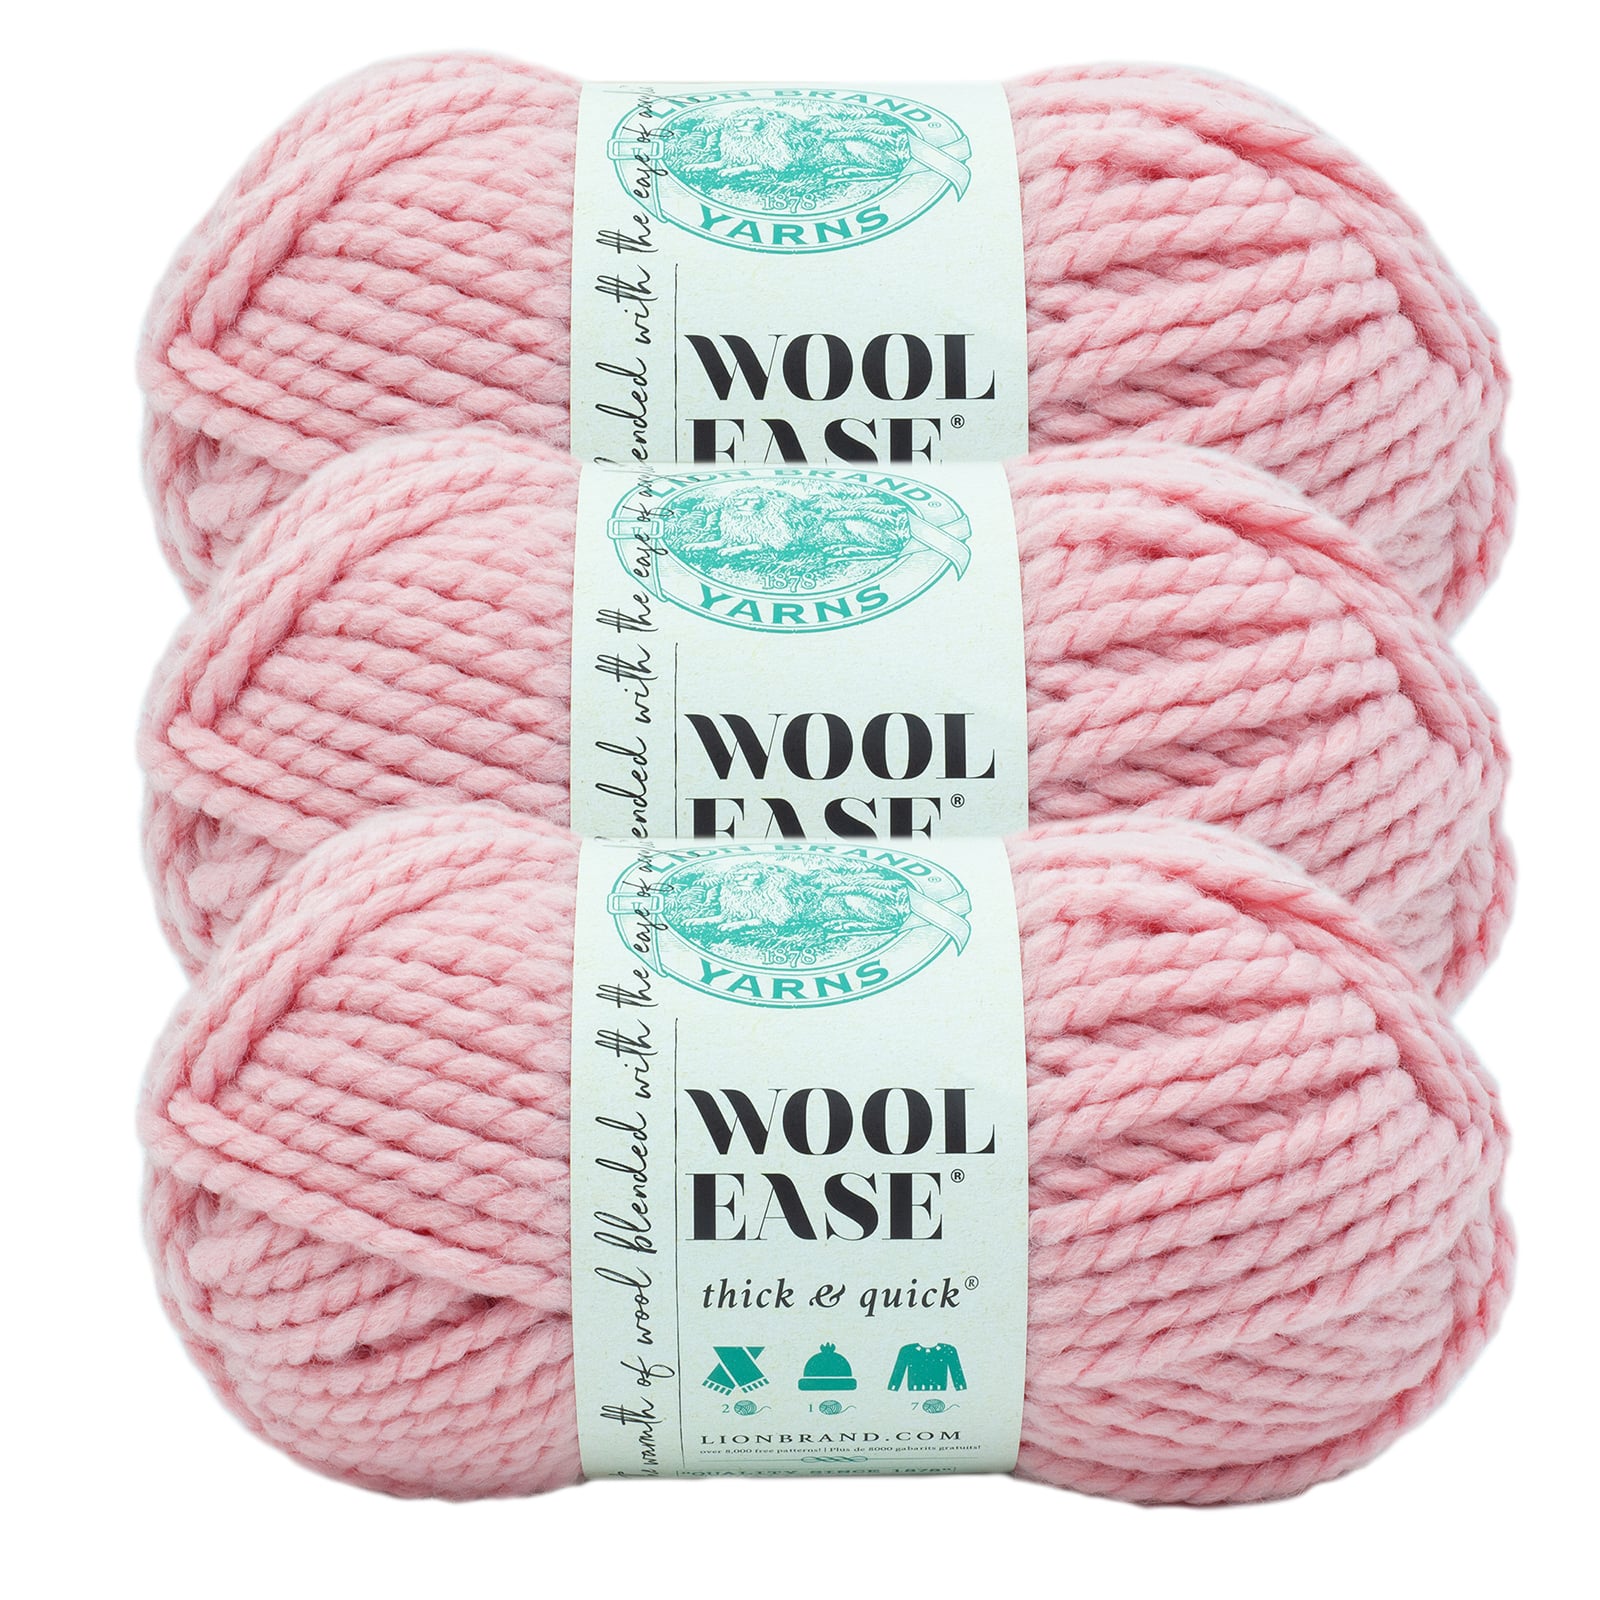 Lion Brand® Wool-Ease® Thick & Quick® Variegated Yarn, Michaels